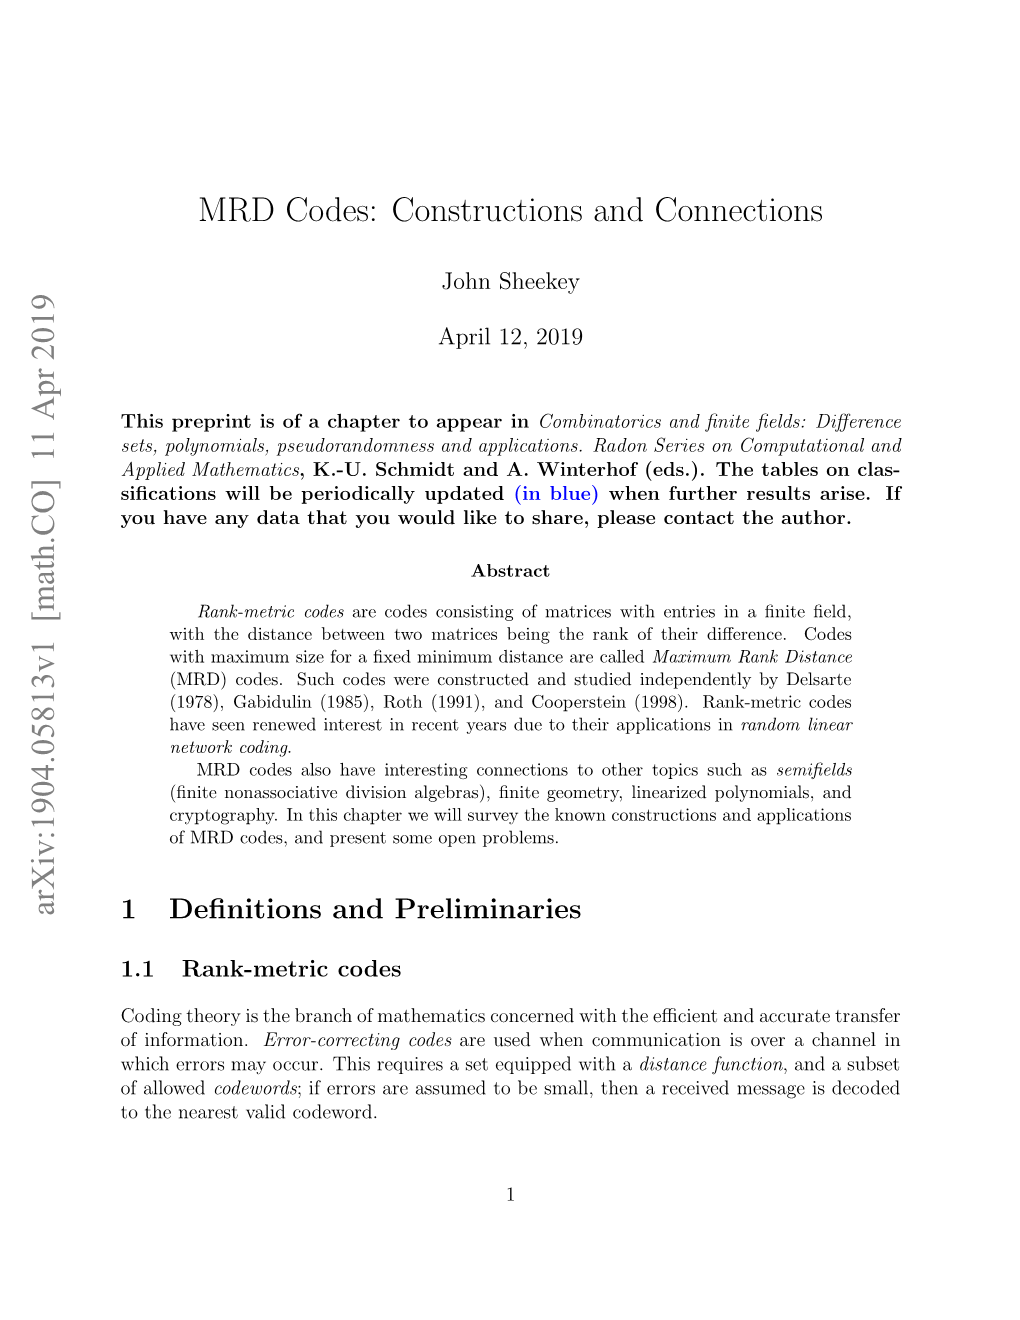 MRD Codes: Constructions and Connections